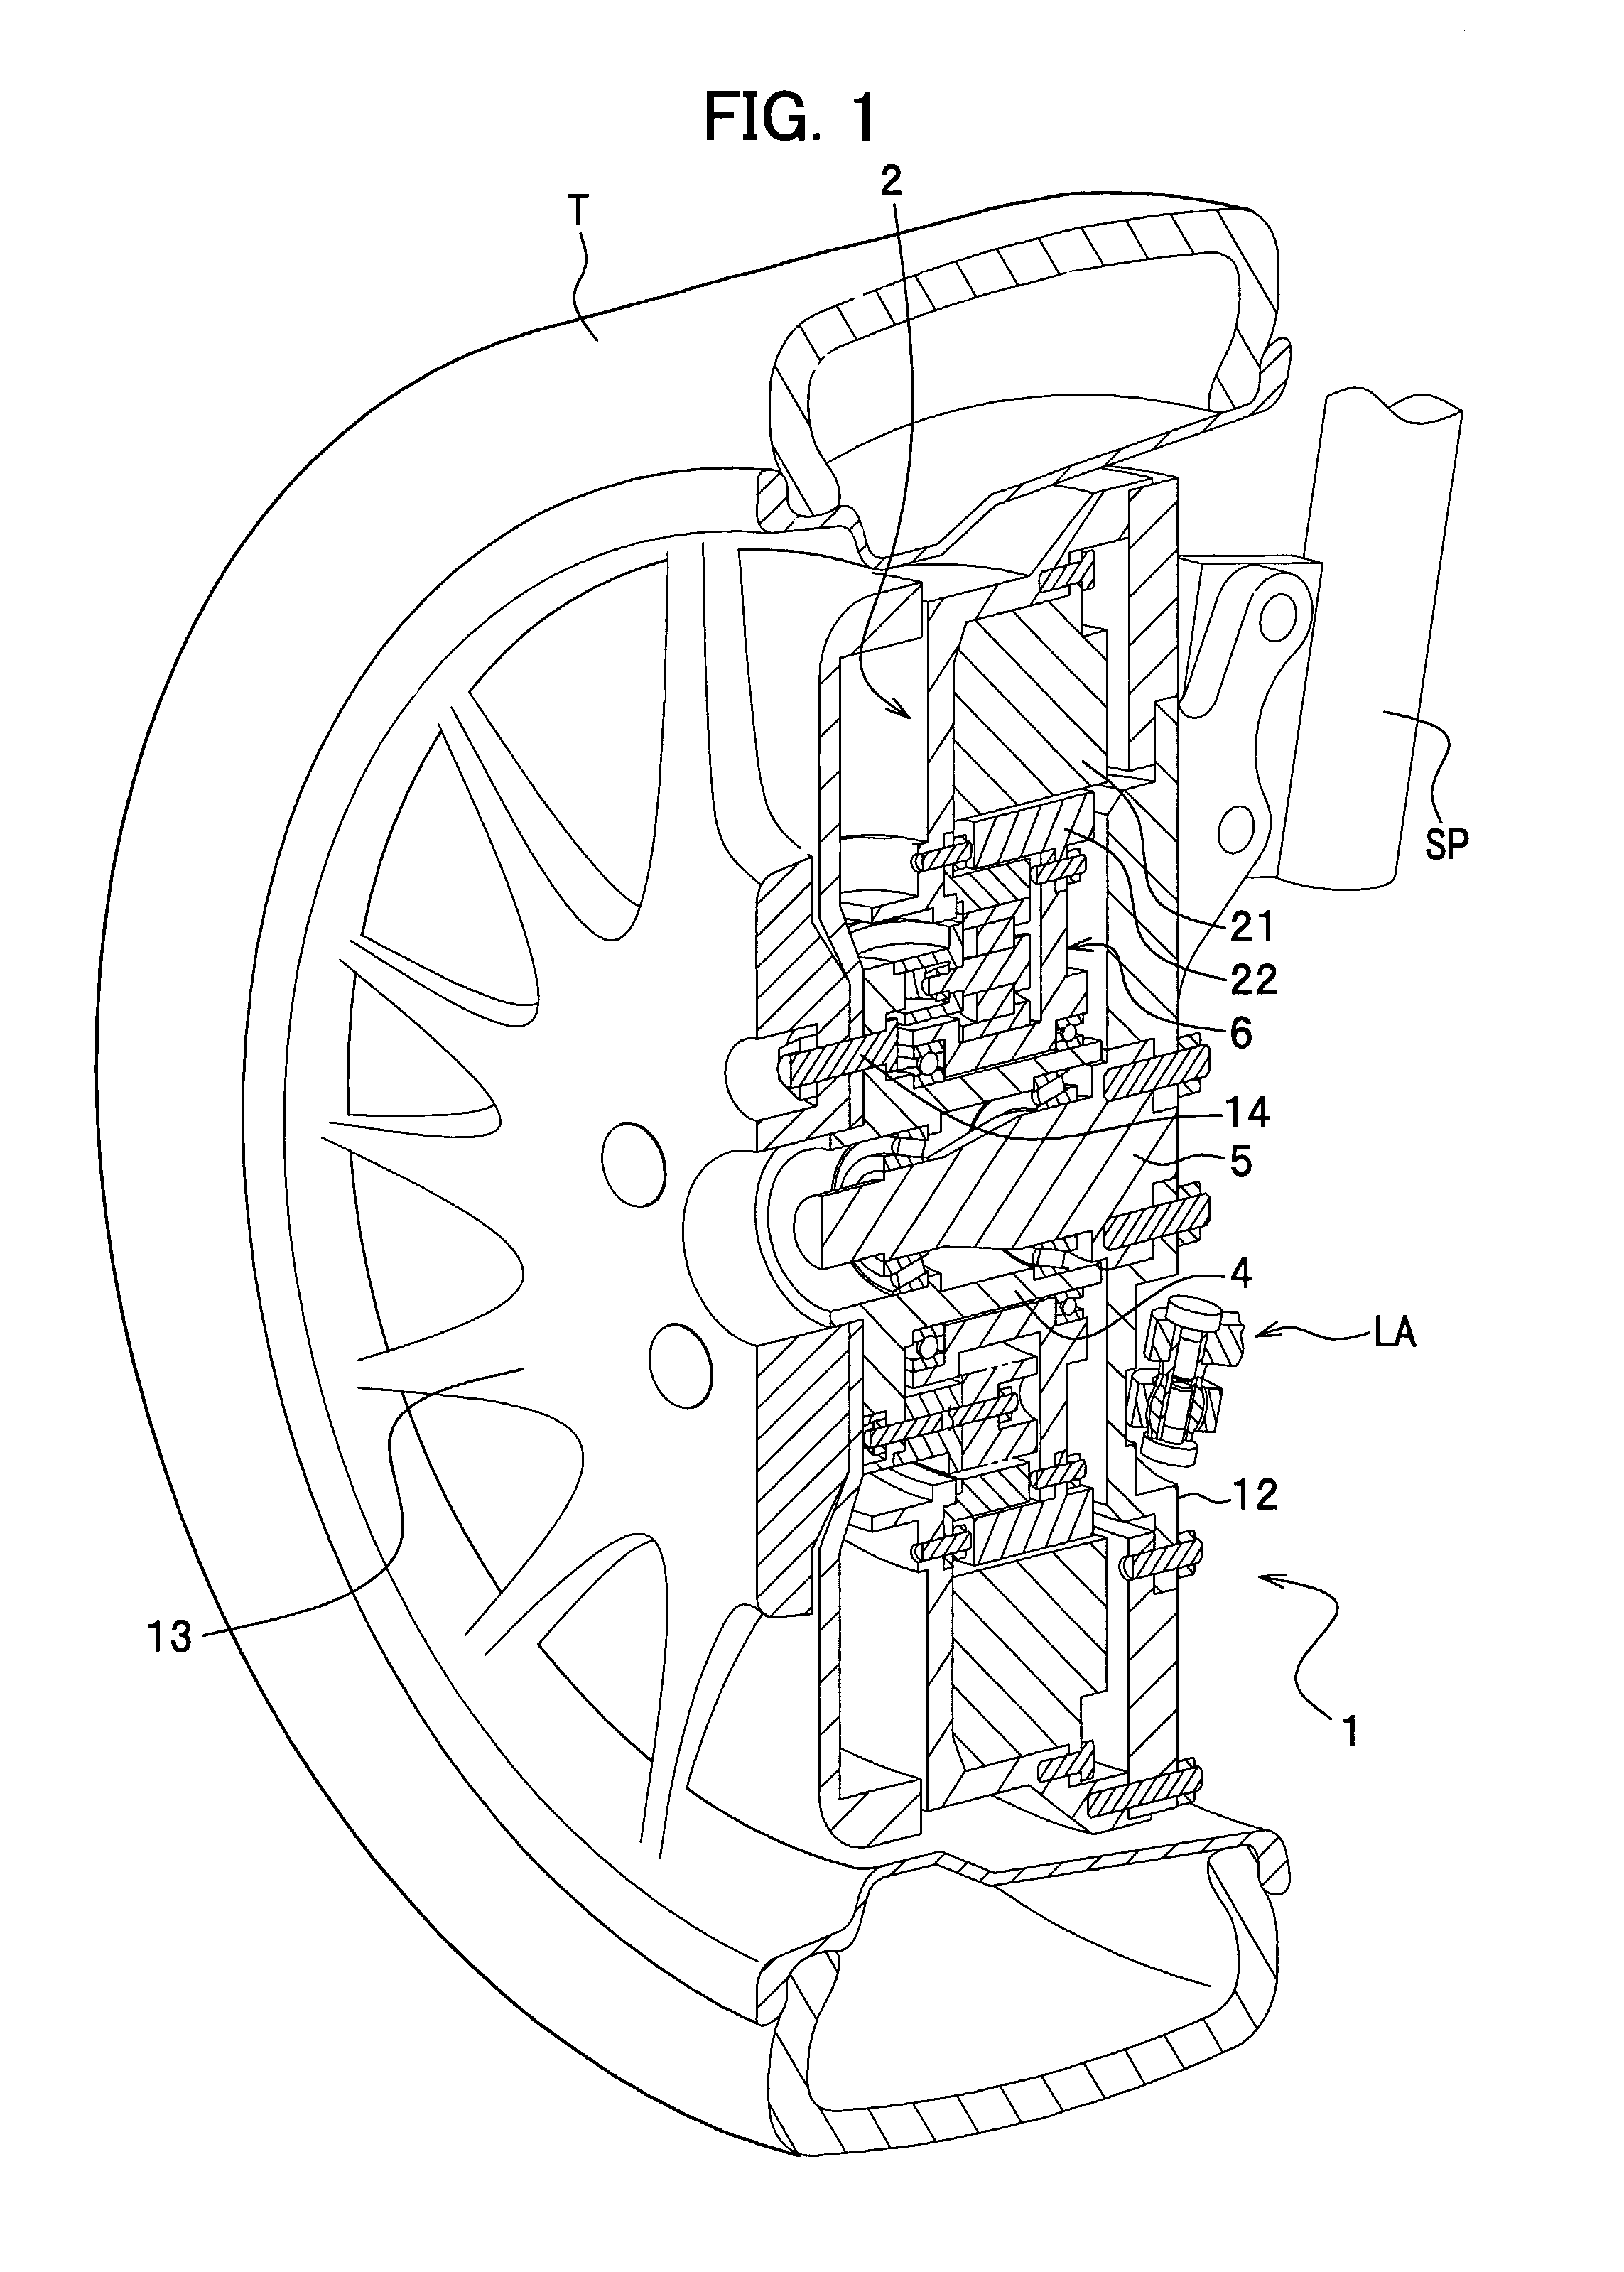 Wheel rotating device for in-wheel motor vehicle